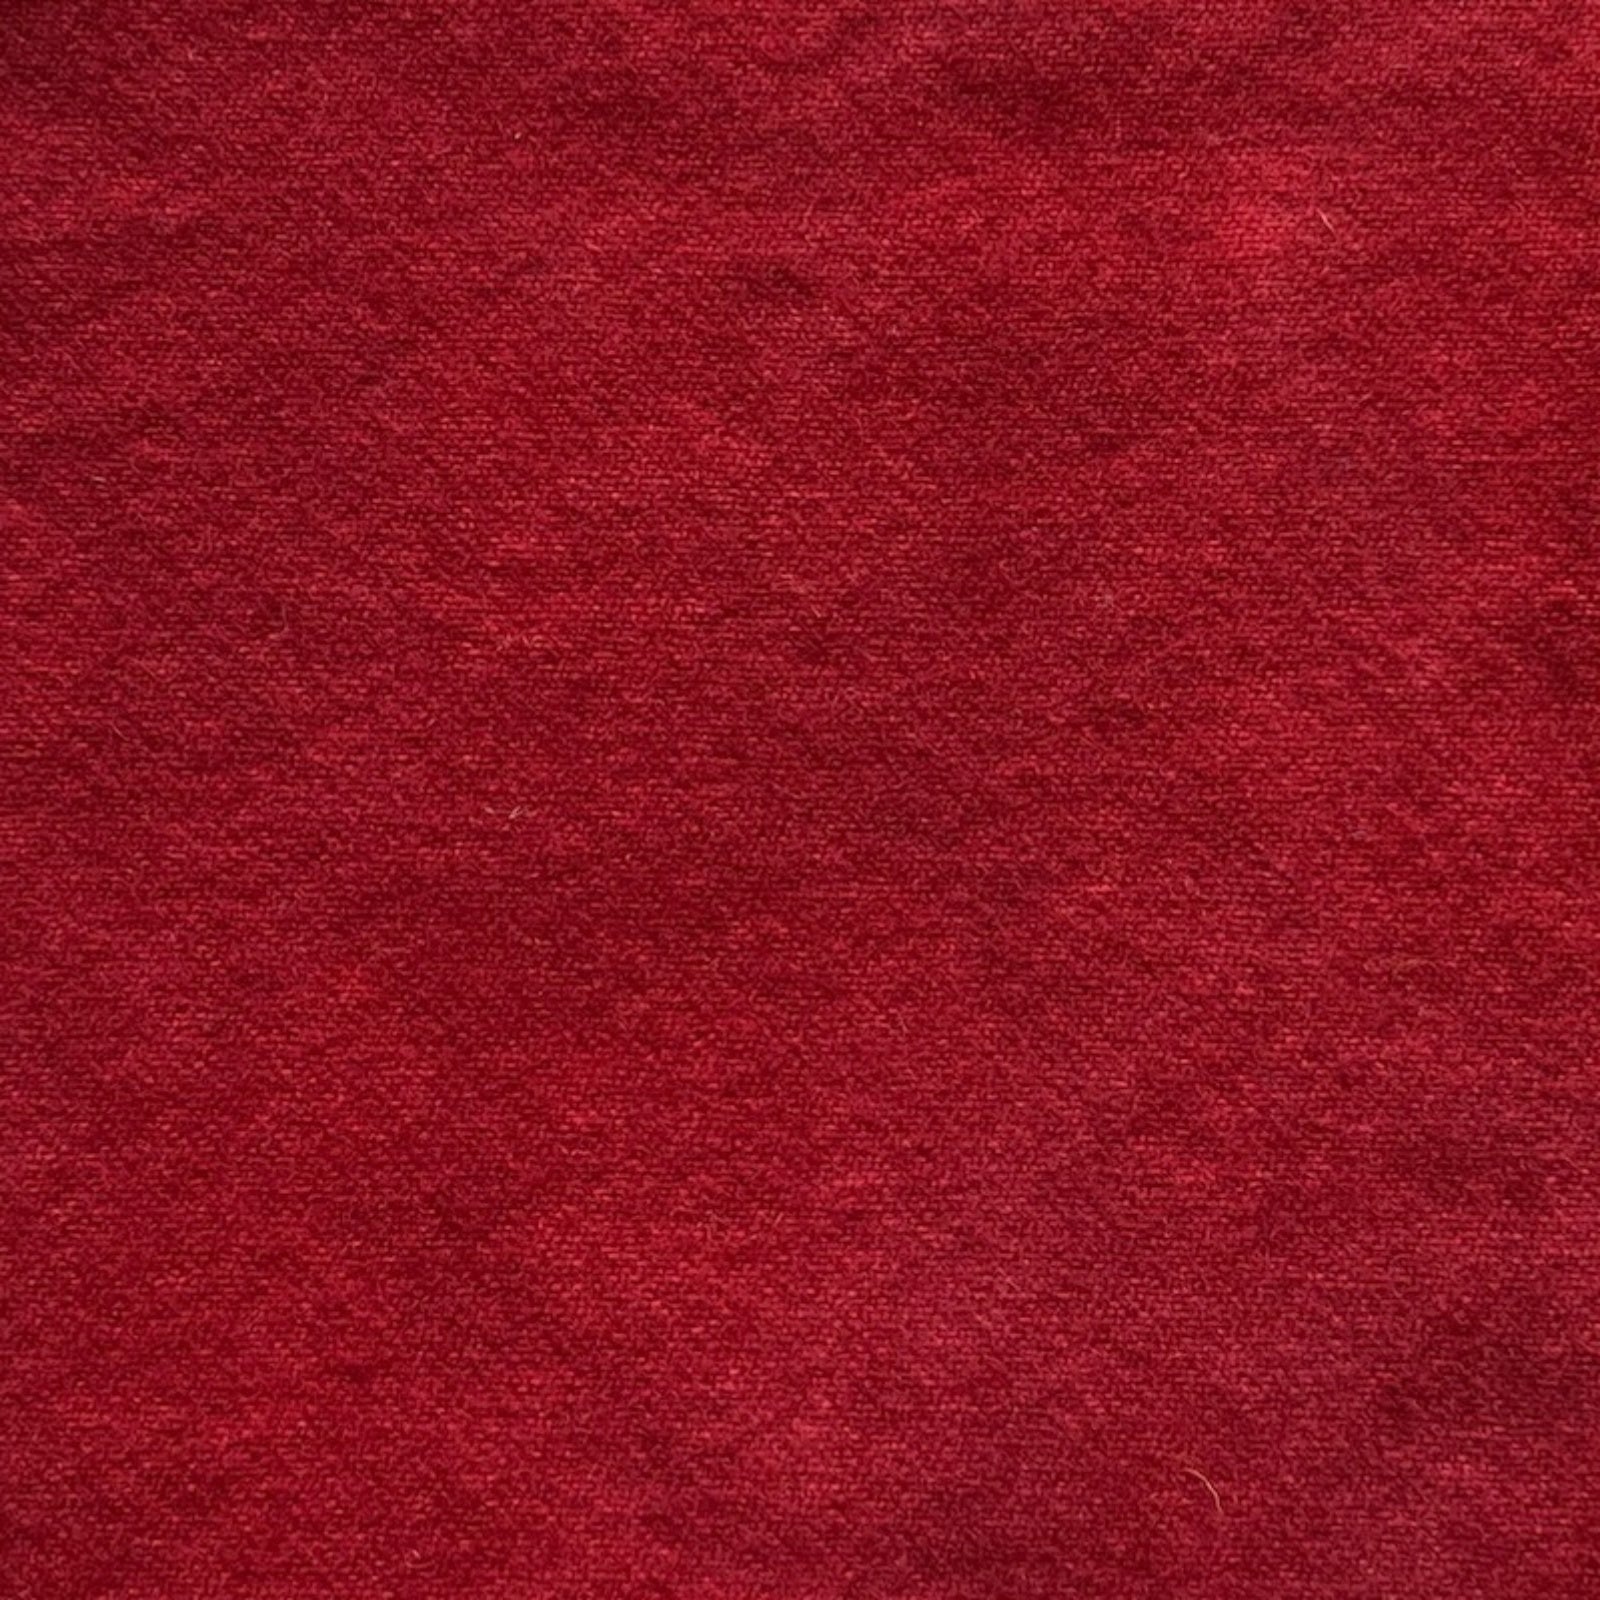 Kilim Red - Colorama Hand Dyed Wool - Offered by HoneyBee Hive Rug Hooking